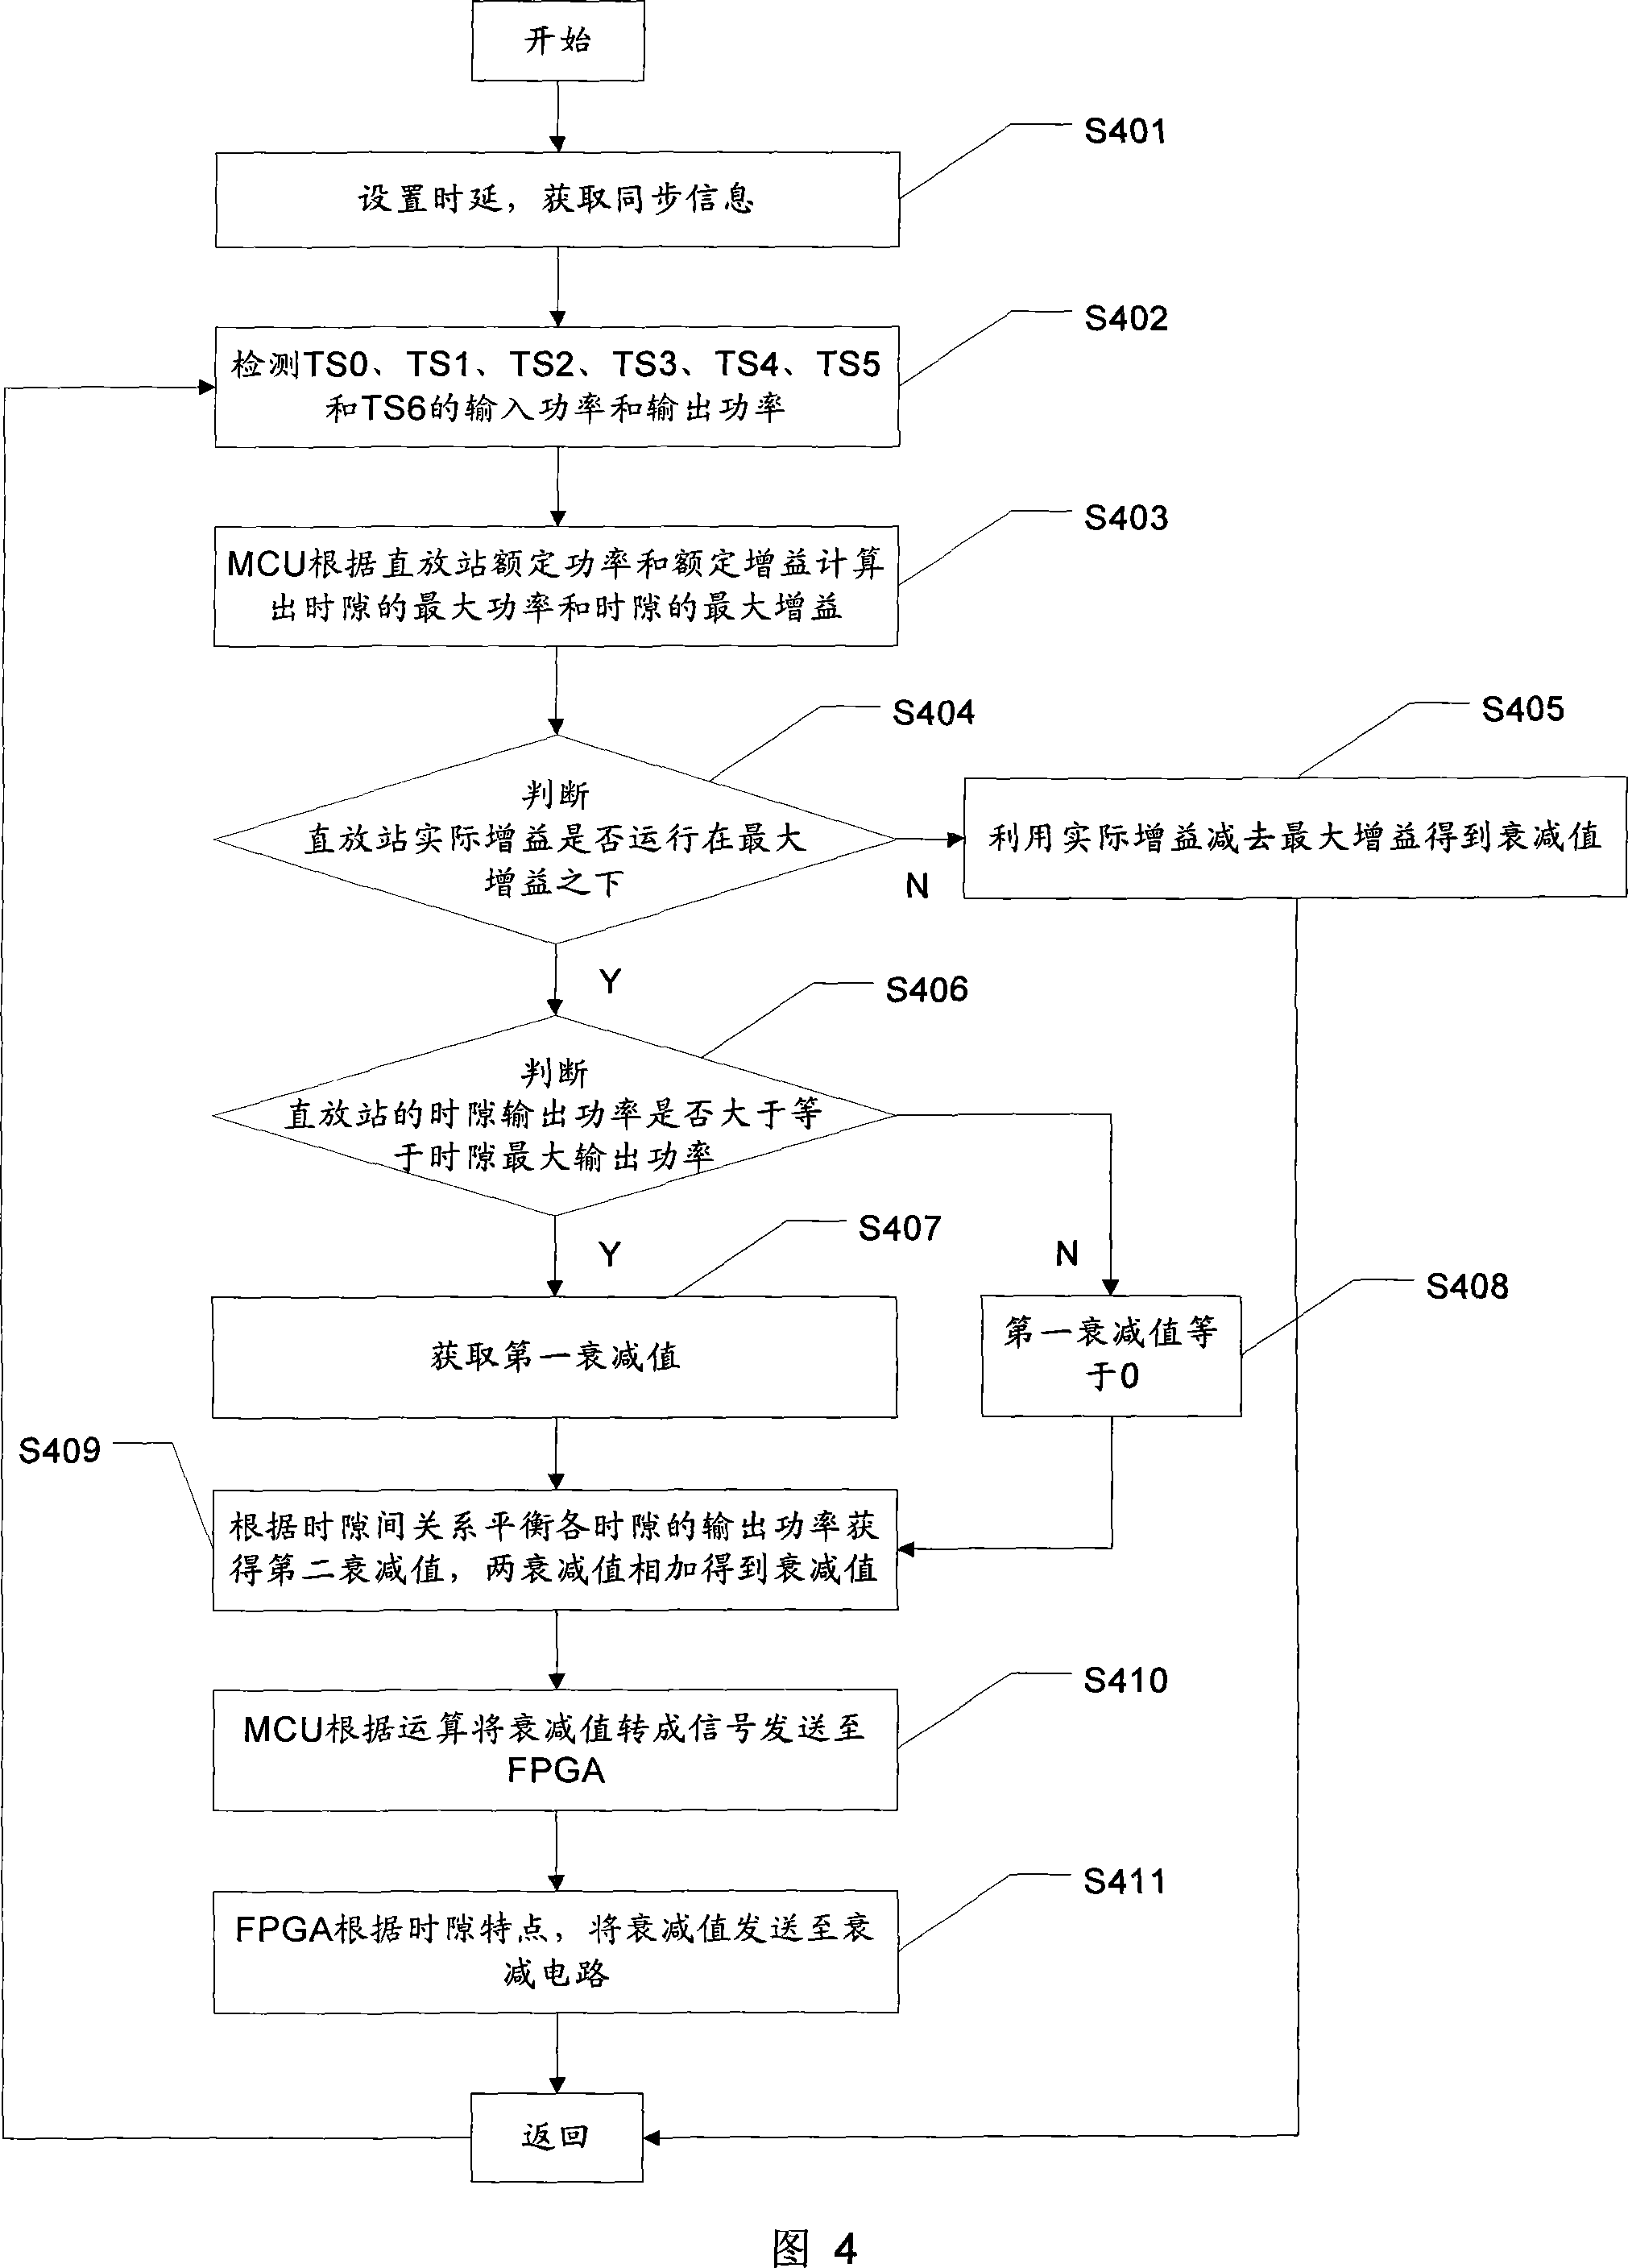 Method and system for single time slot numerically controlling attenuation